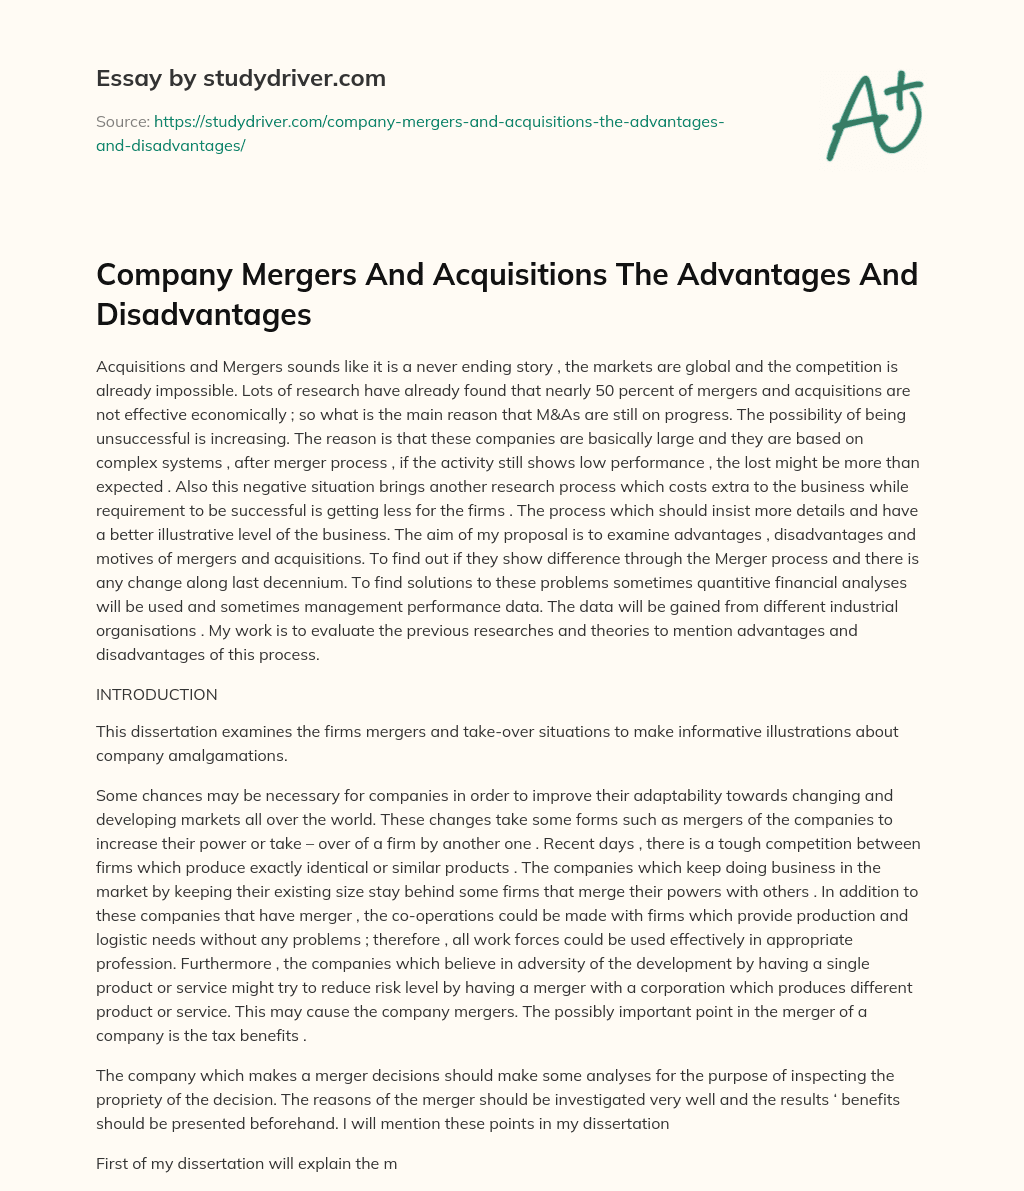 Company Mergers and Acquisitions the Advantages and Disadvantages essay